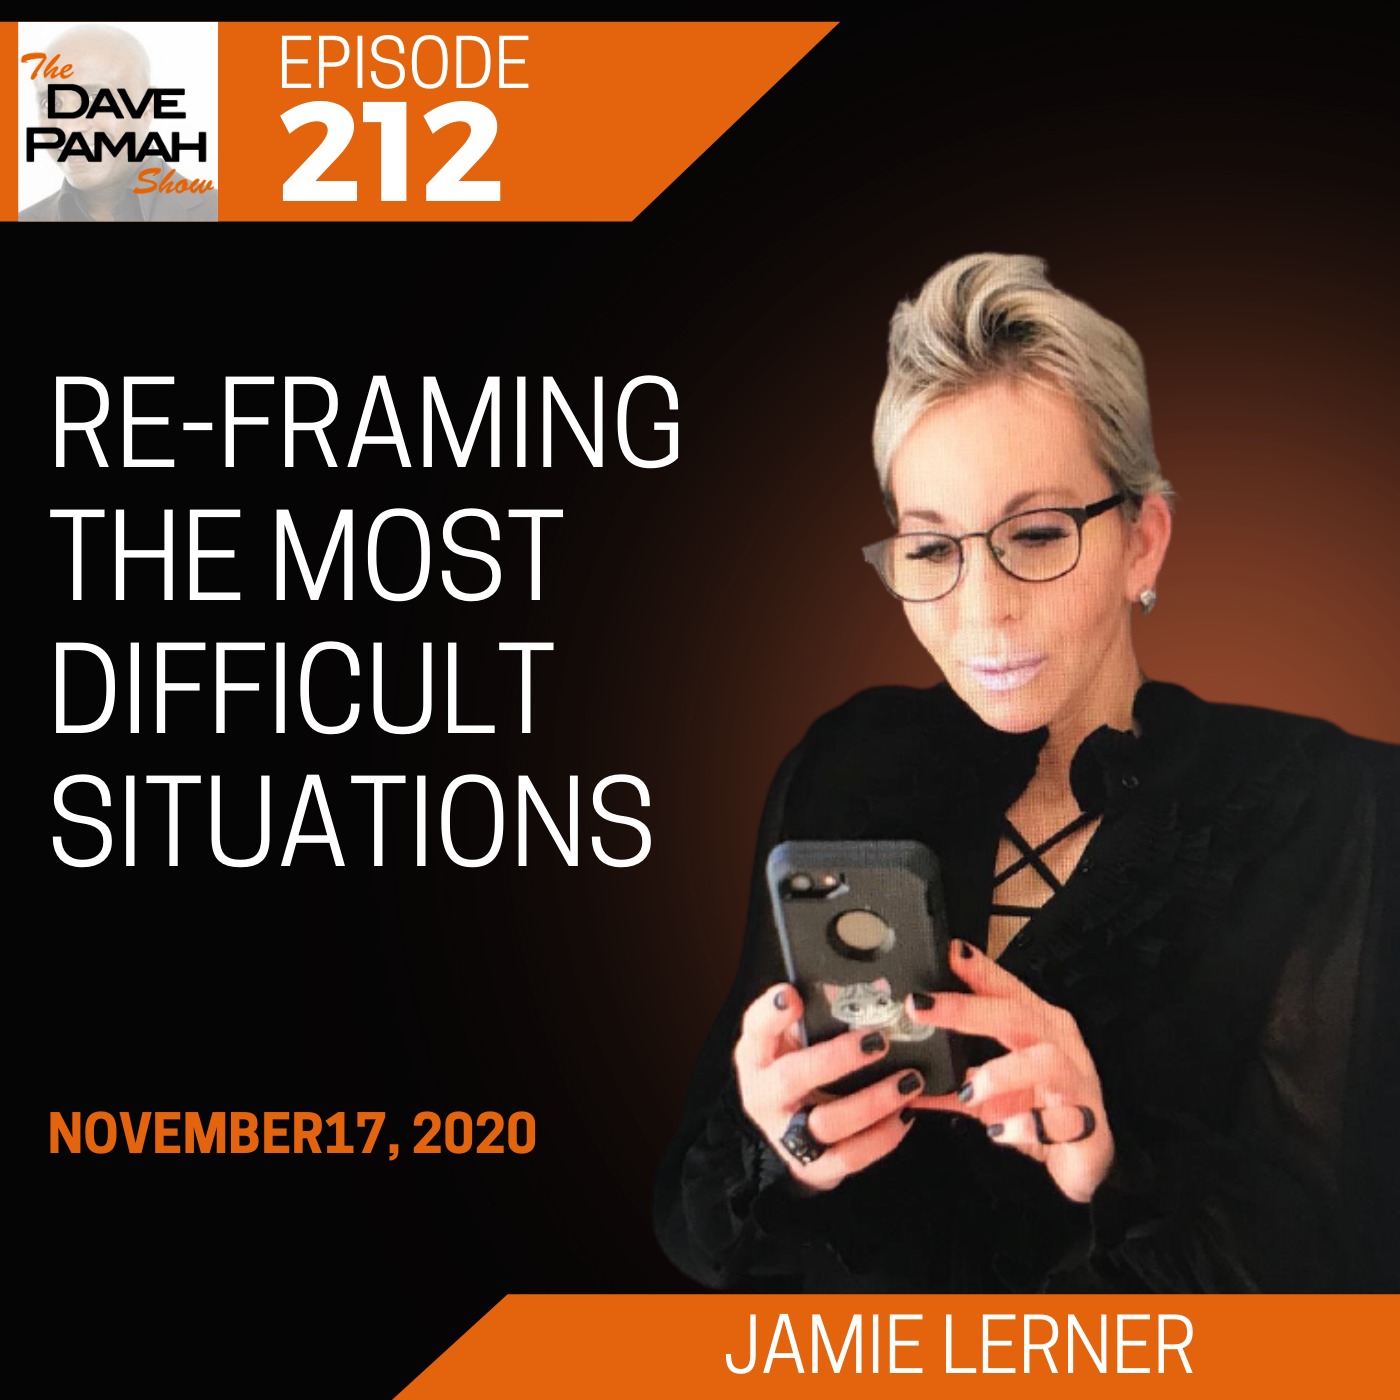 Re-framing the most difficult situations with Jamie Lerner